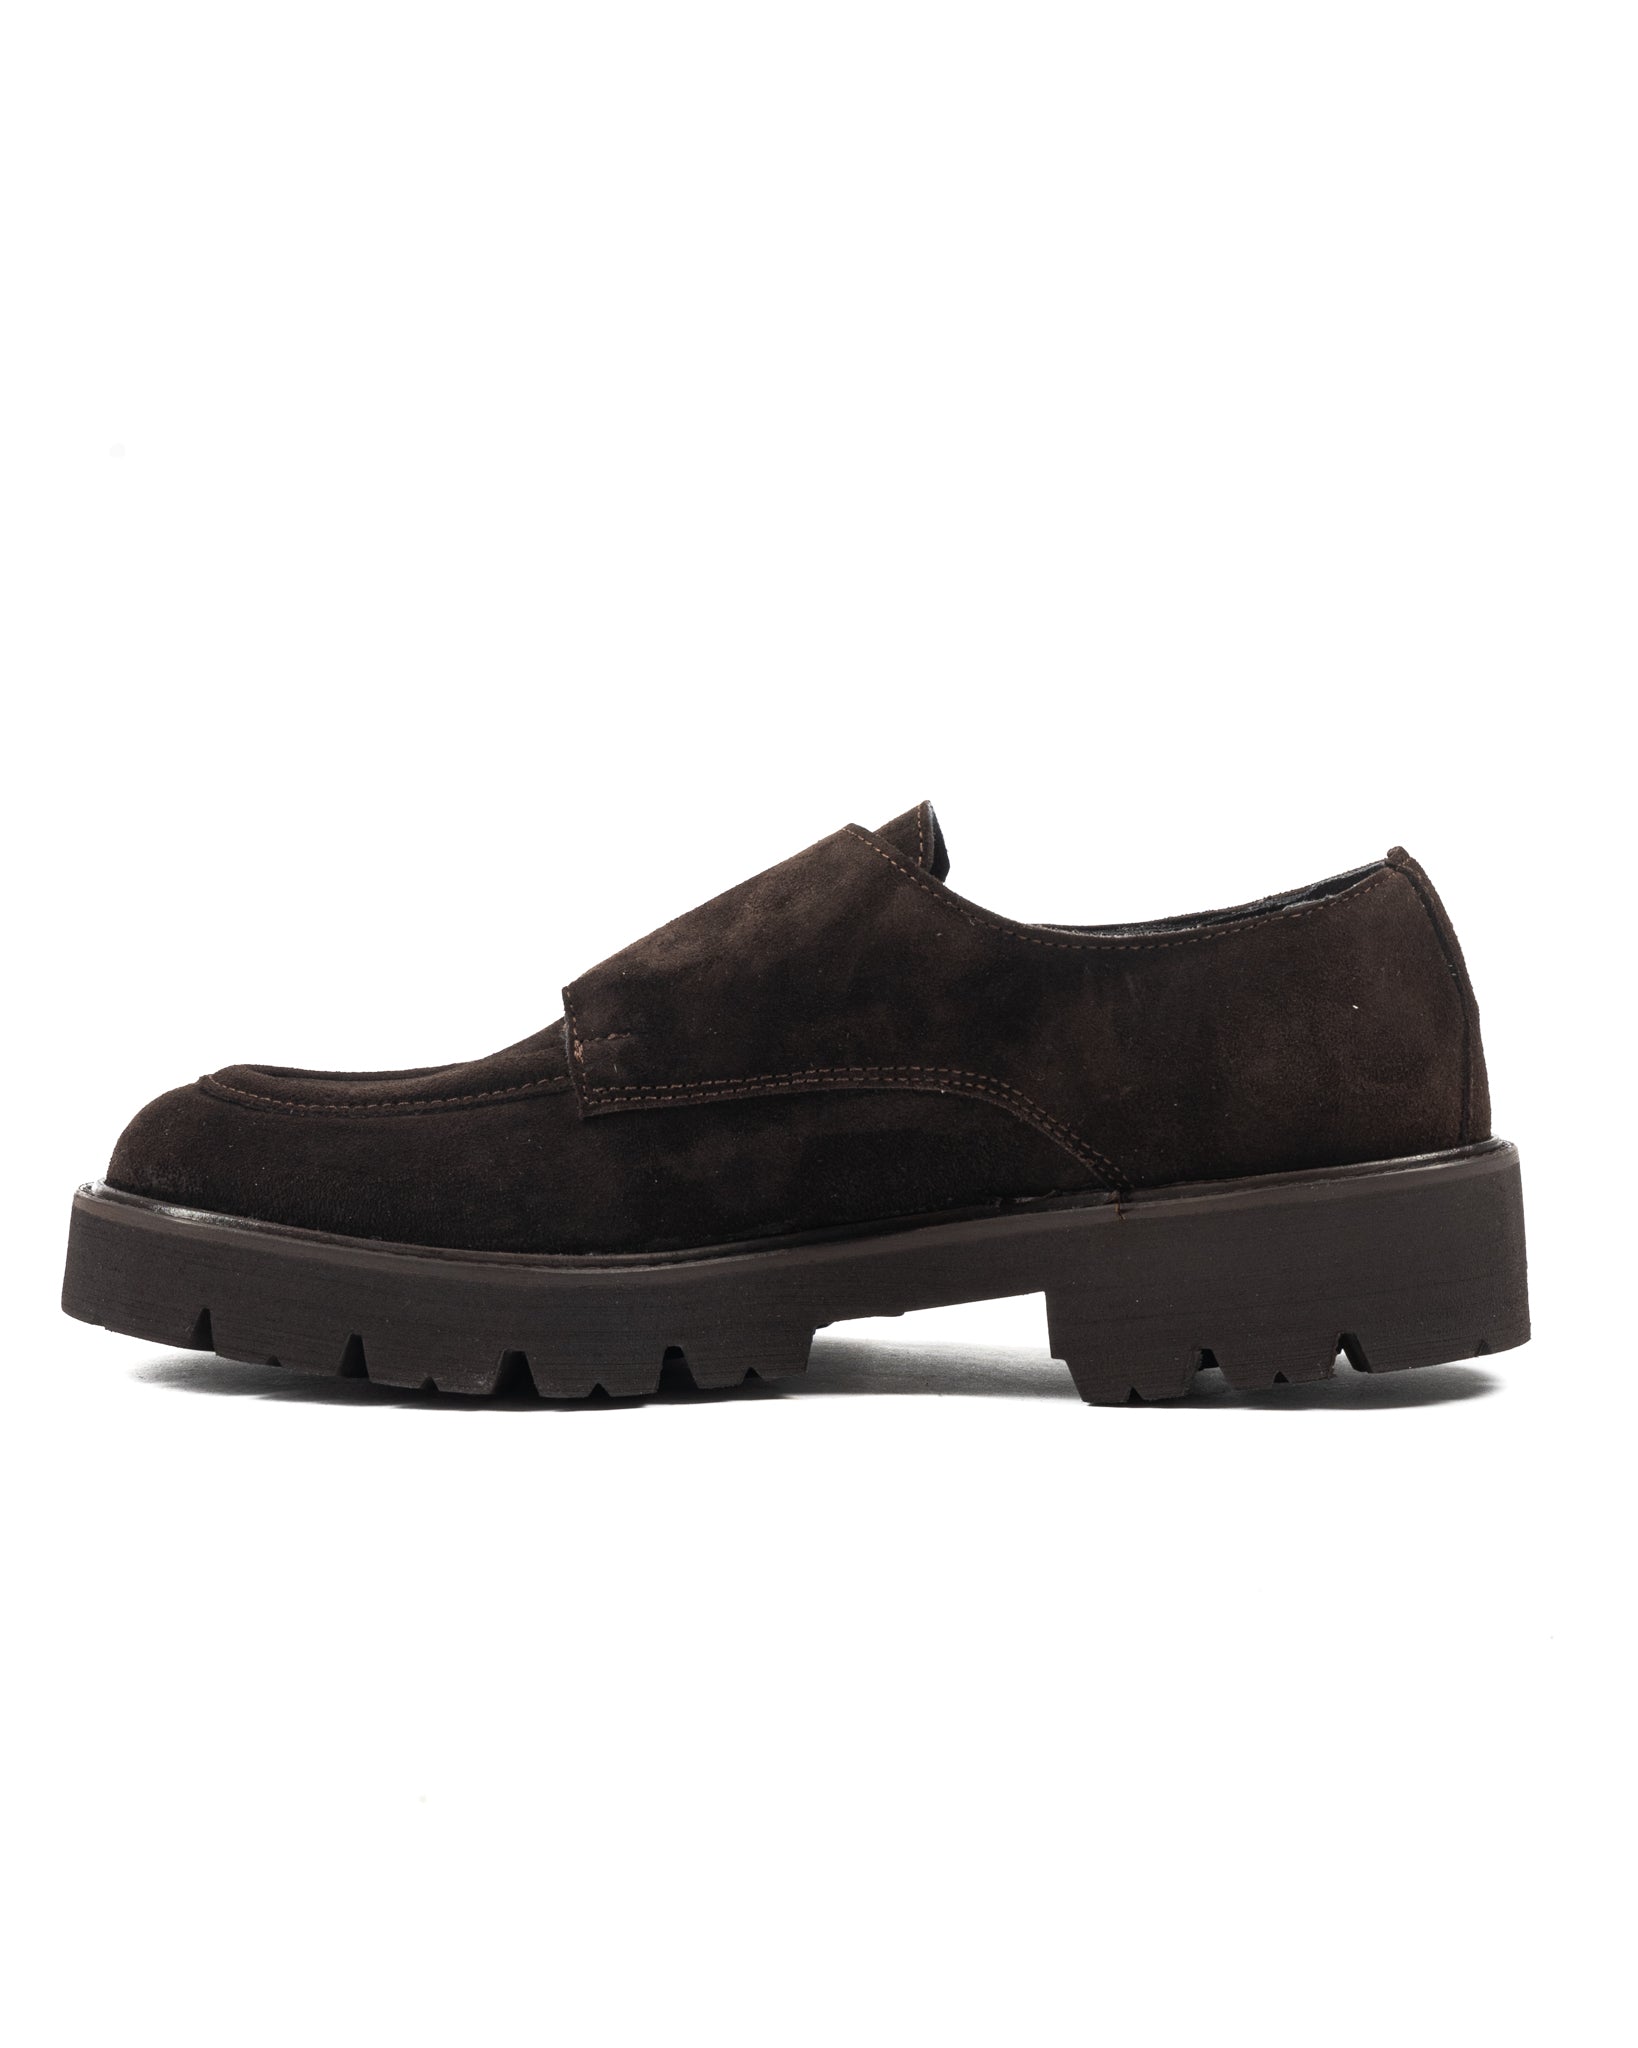 Falcon- dark brown suede moccasin with double buckle 